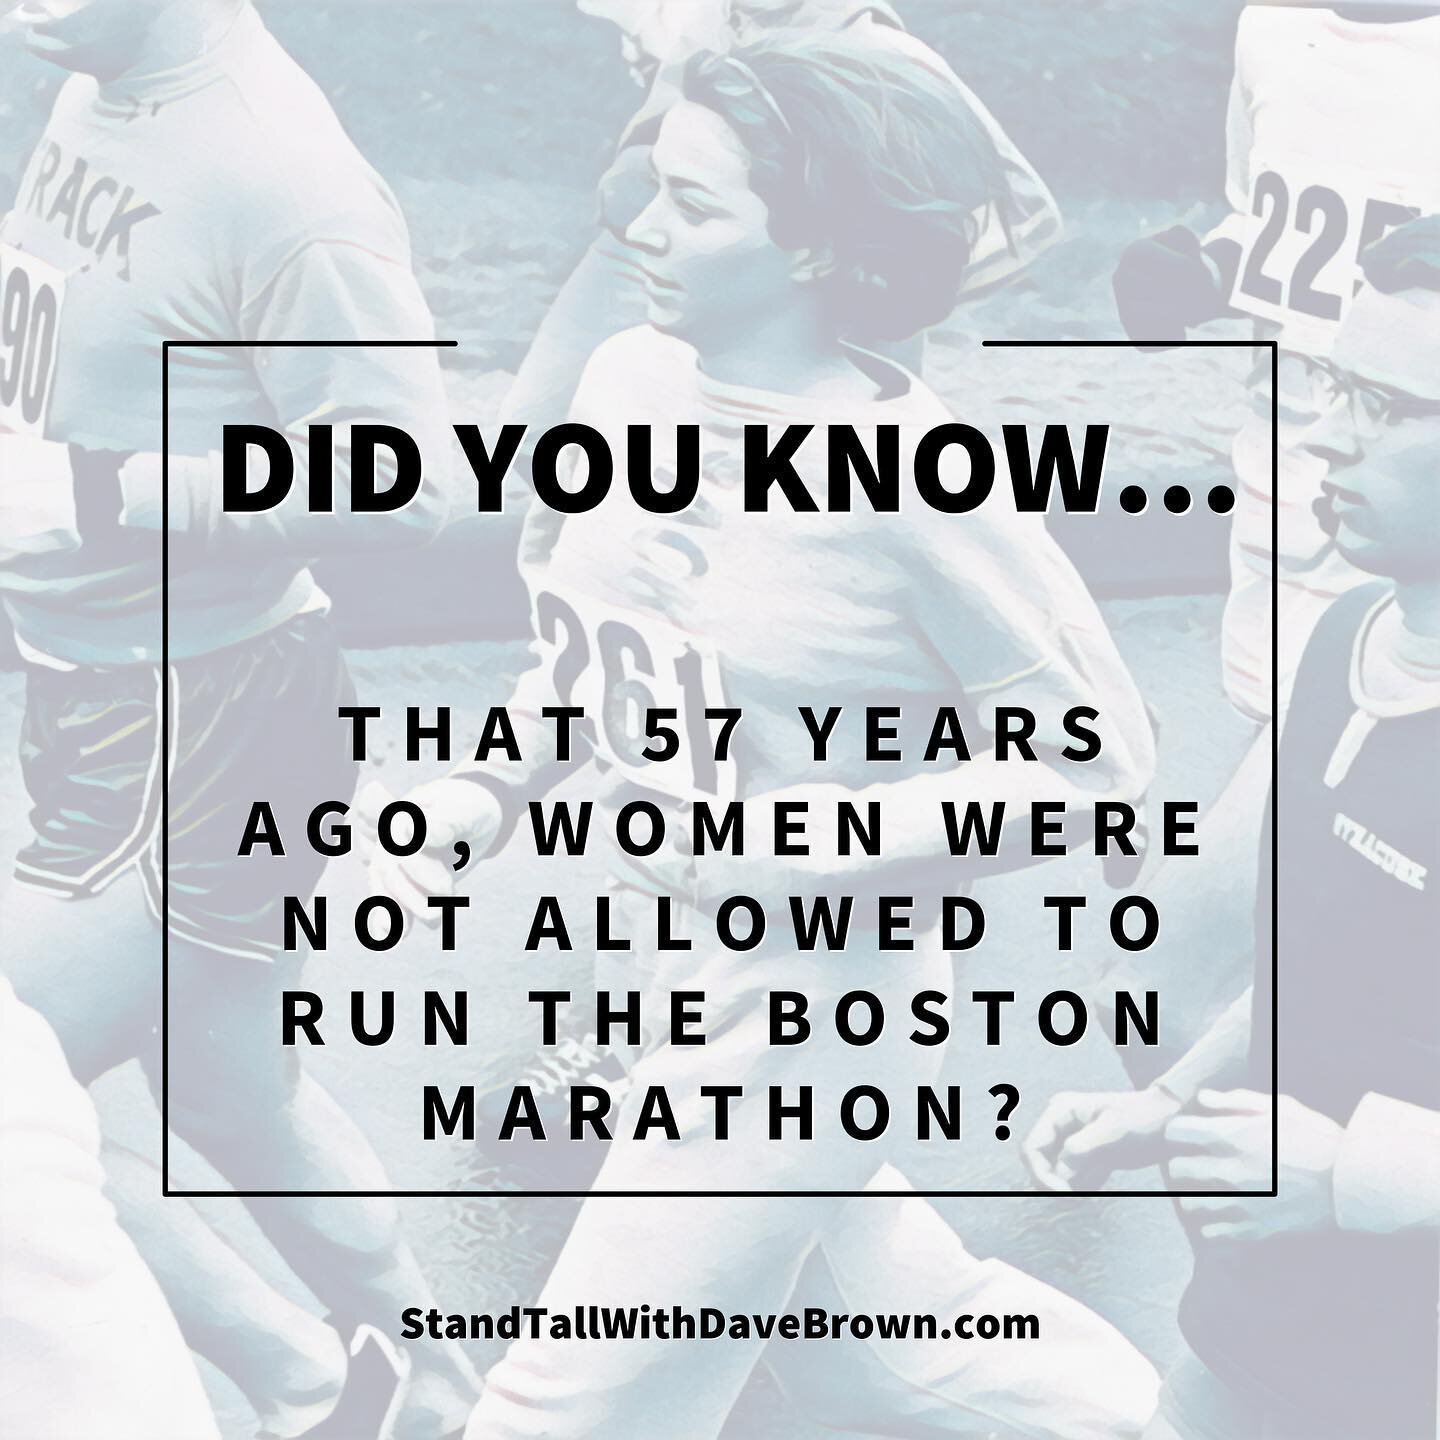 Kathrine Switzer

&ldquo;On April 19, 1967, 20-year-old Kathrine Switzer (bib number 261) lined up to run the Boston Marathon at a time when women weren&rsquo;t permitted to compete. At mile two a race official, Jock Semple, tried to stop her, but Sw